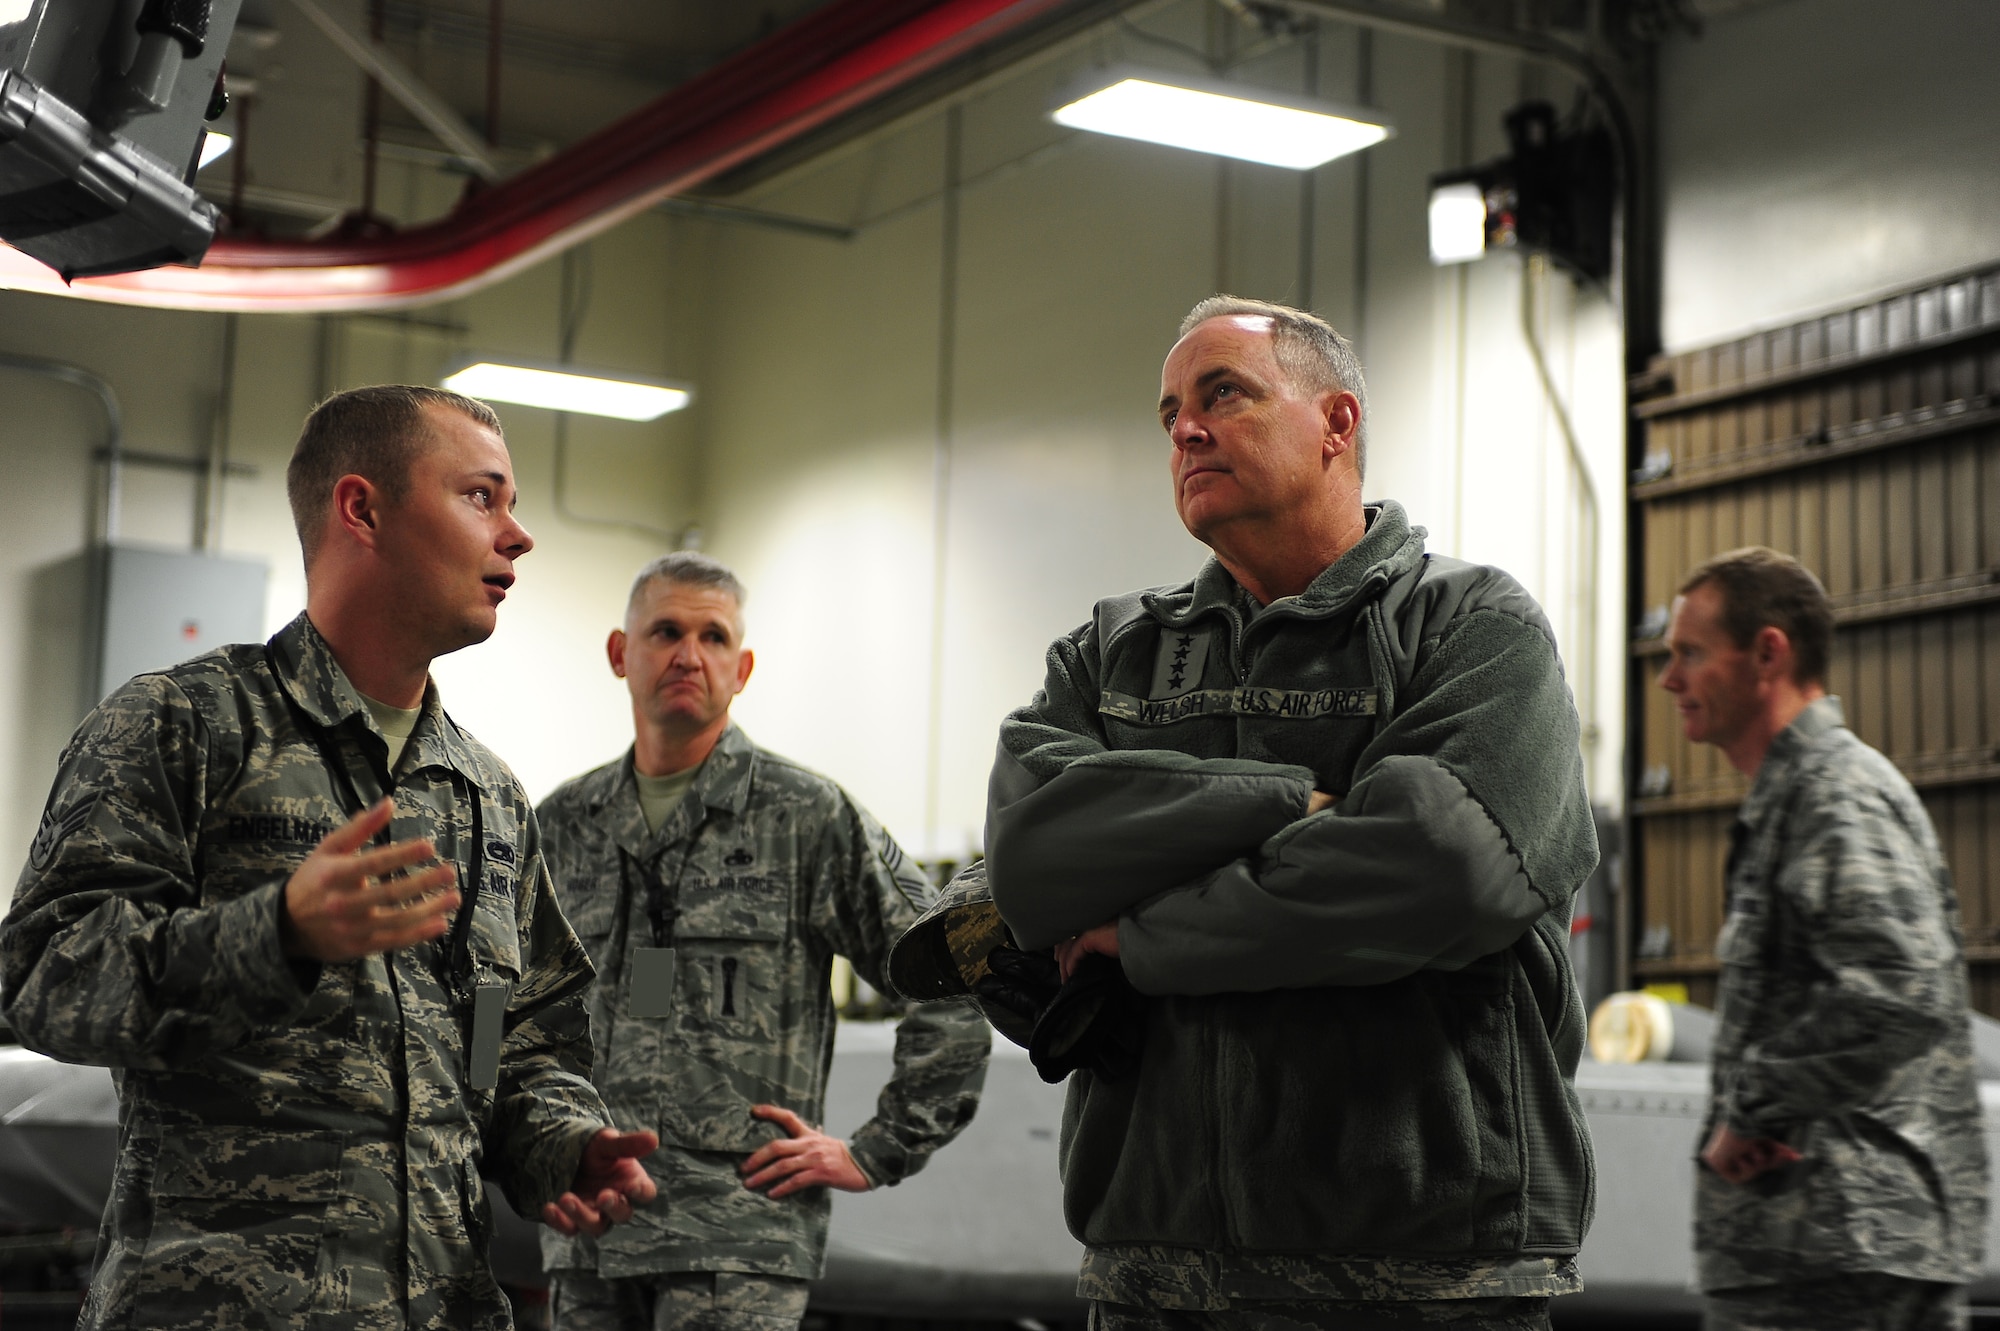 MINOT AIR FORCE BASE, N.D. -- Air Force Chief of Staff Gen. Mark A. Welsh III talks with Airmen from Team Minot during a tour of the Weapons Storage Area here, Nov. 21. The tour was part of Welsh's first visit to Minot since becoming the chief of staff. (U.S. Air Force photo/Airman 1st Class Kristoffer Kaubisch)